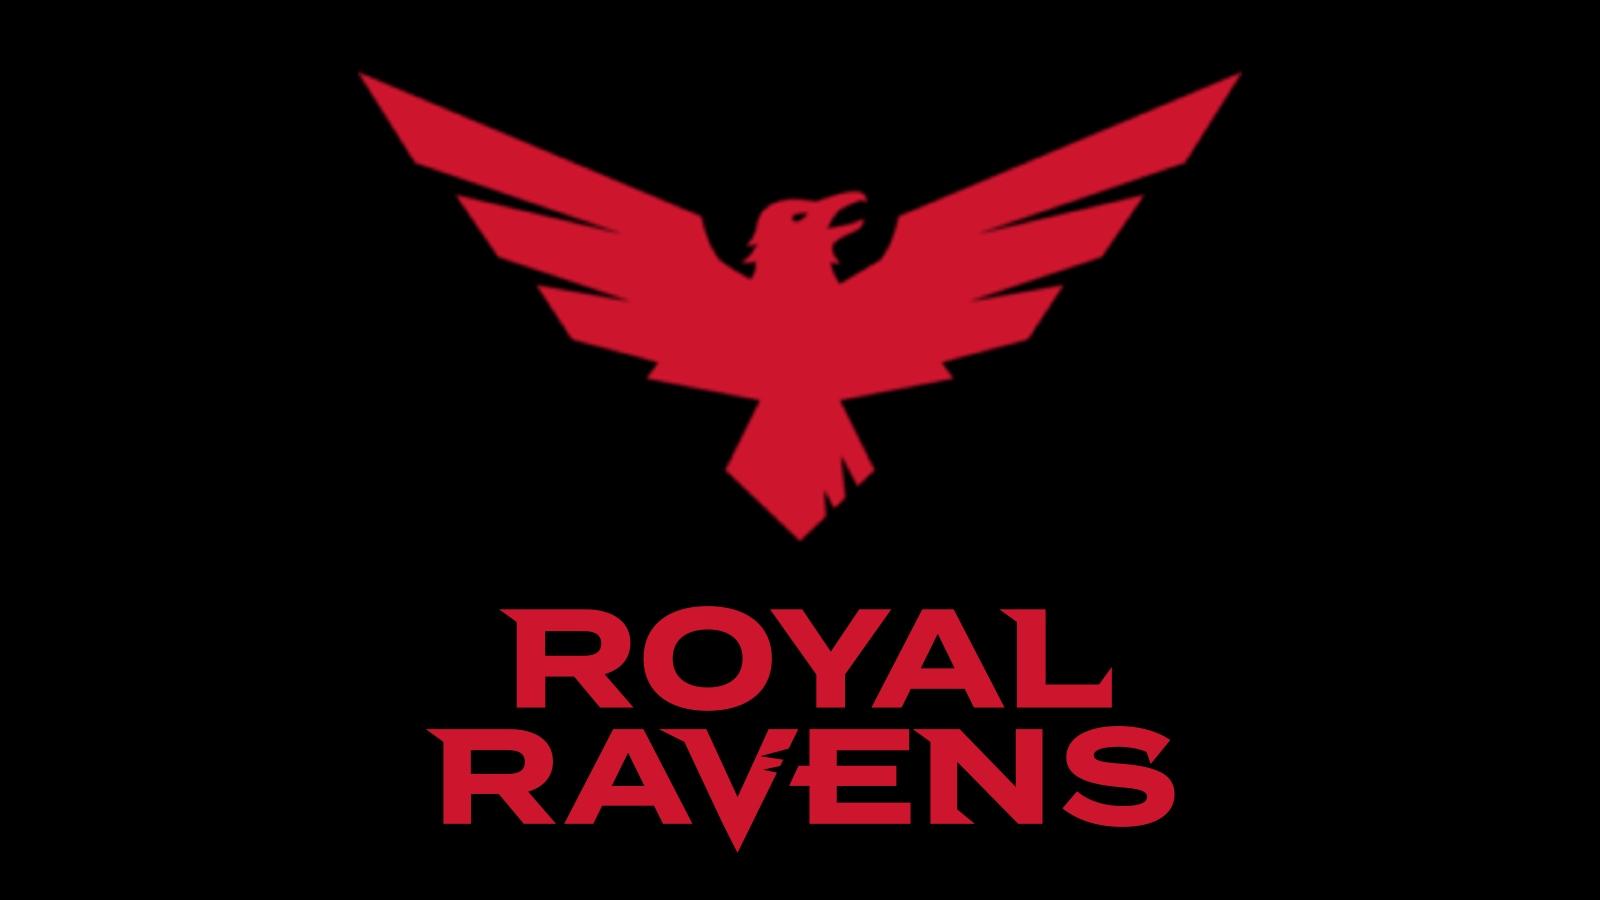 Royal Ravens logo without the word 'London'